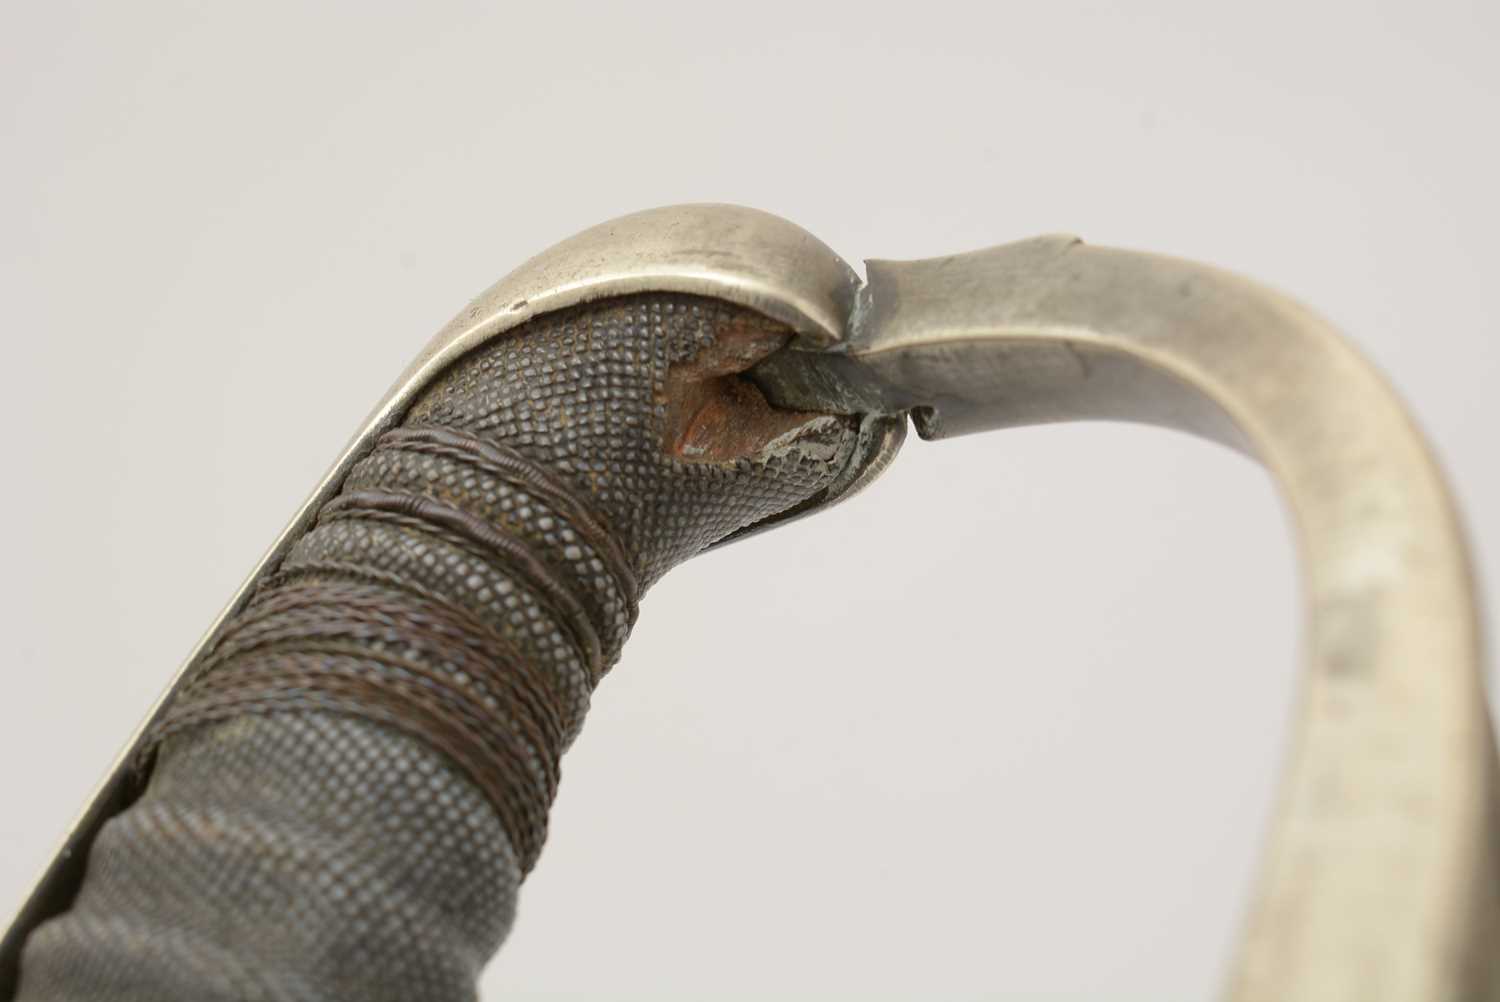 A first half 19th Century British Cavalry Officer's sword, - Image 10 of 14